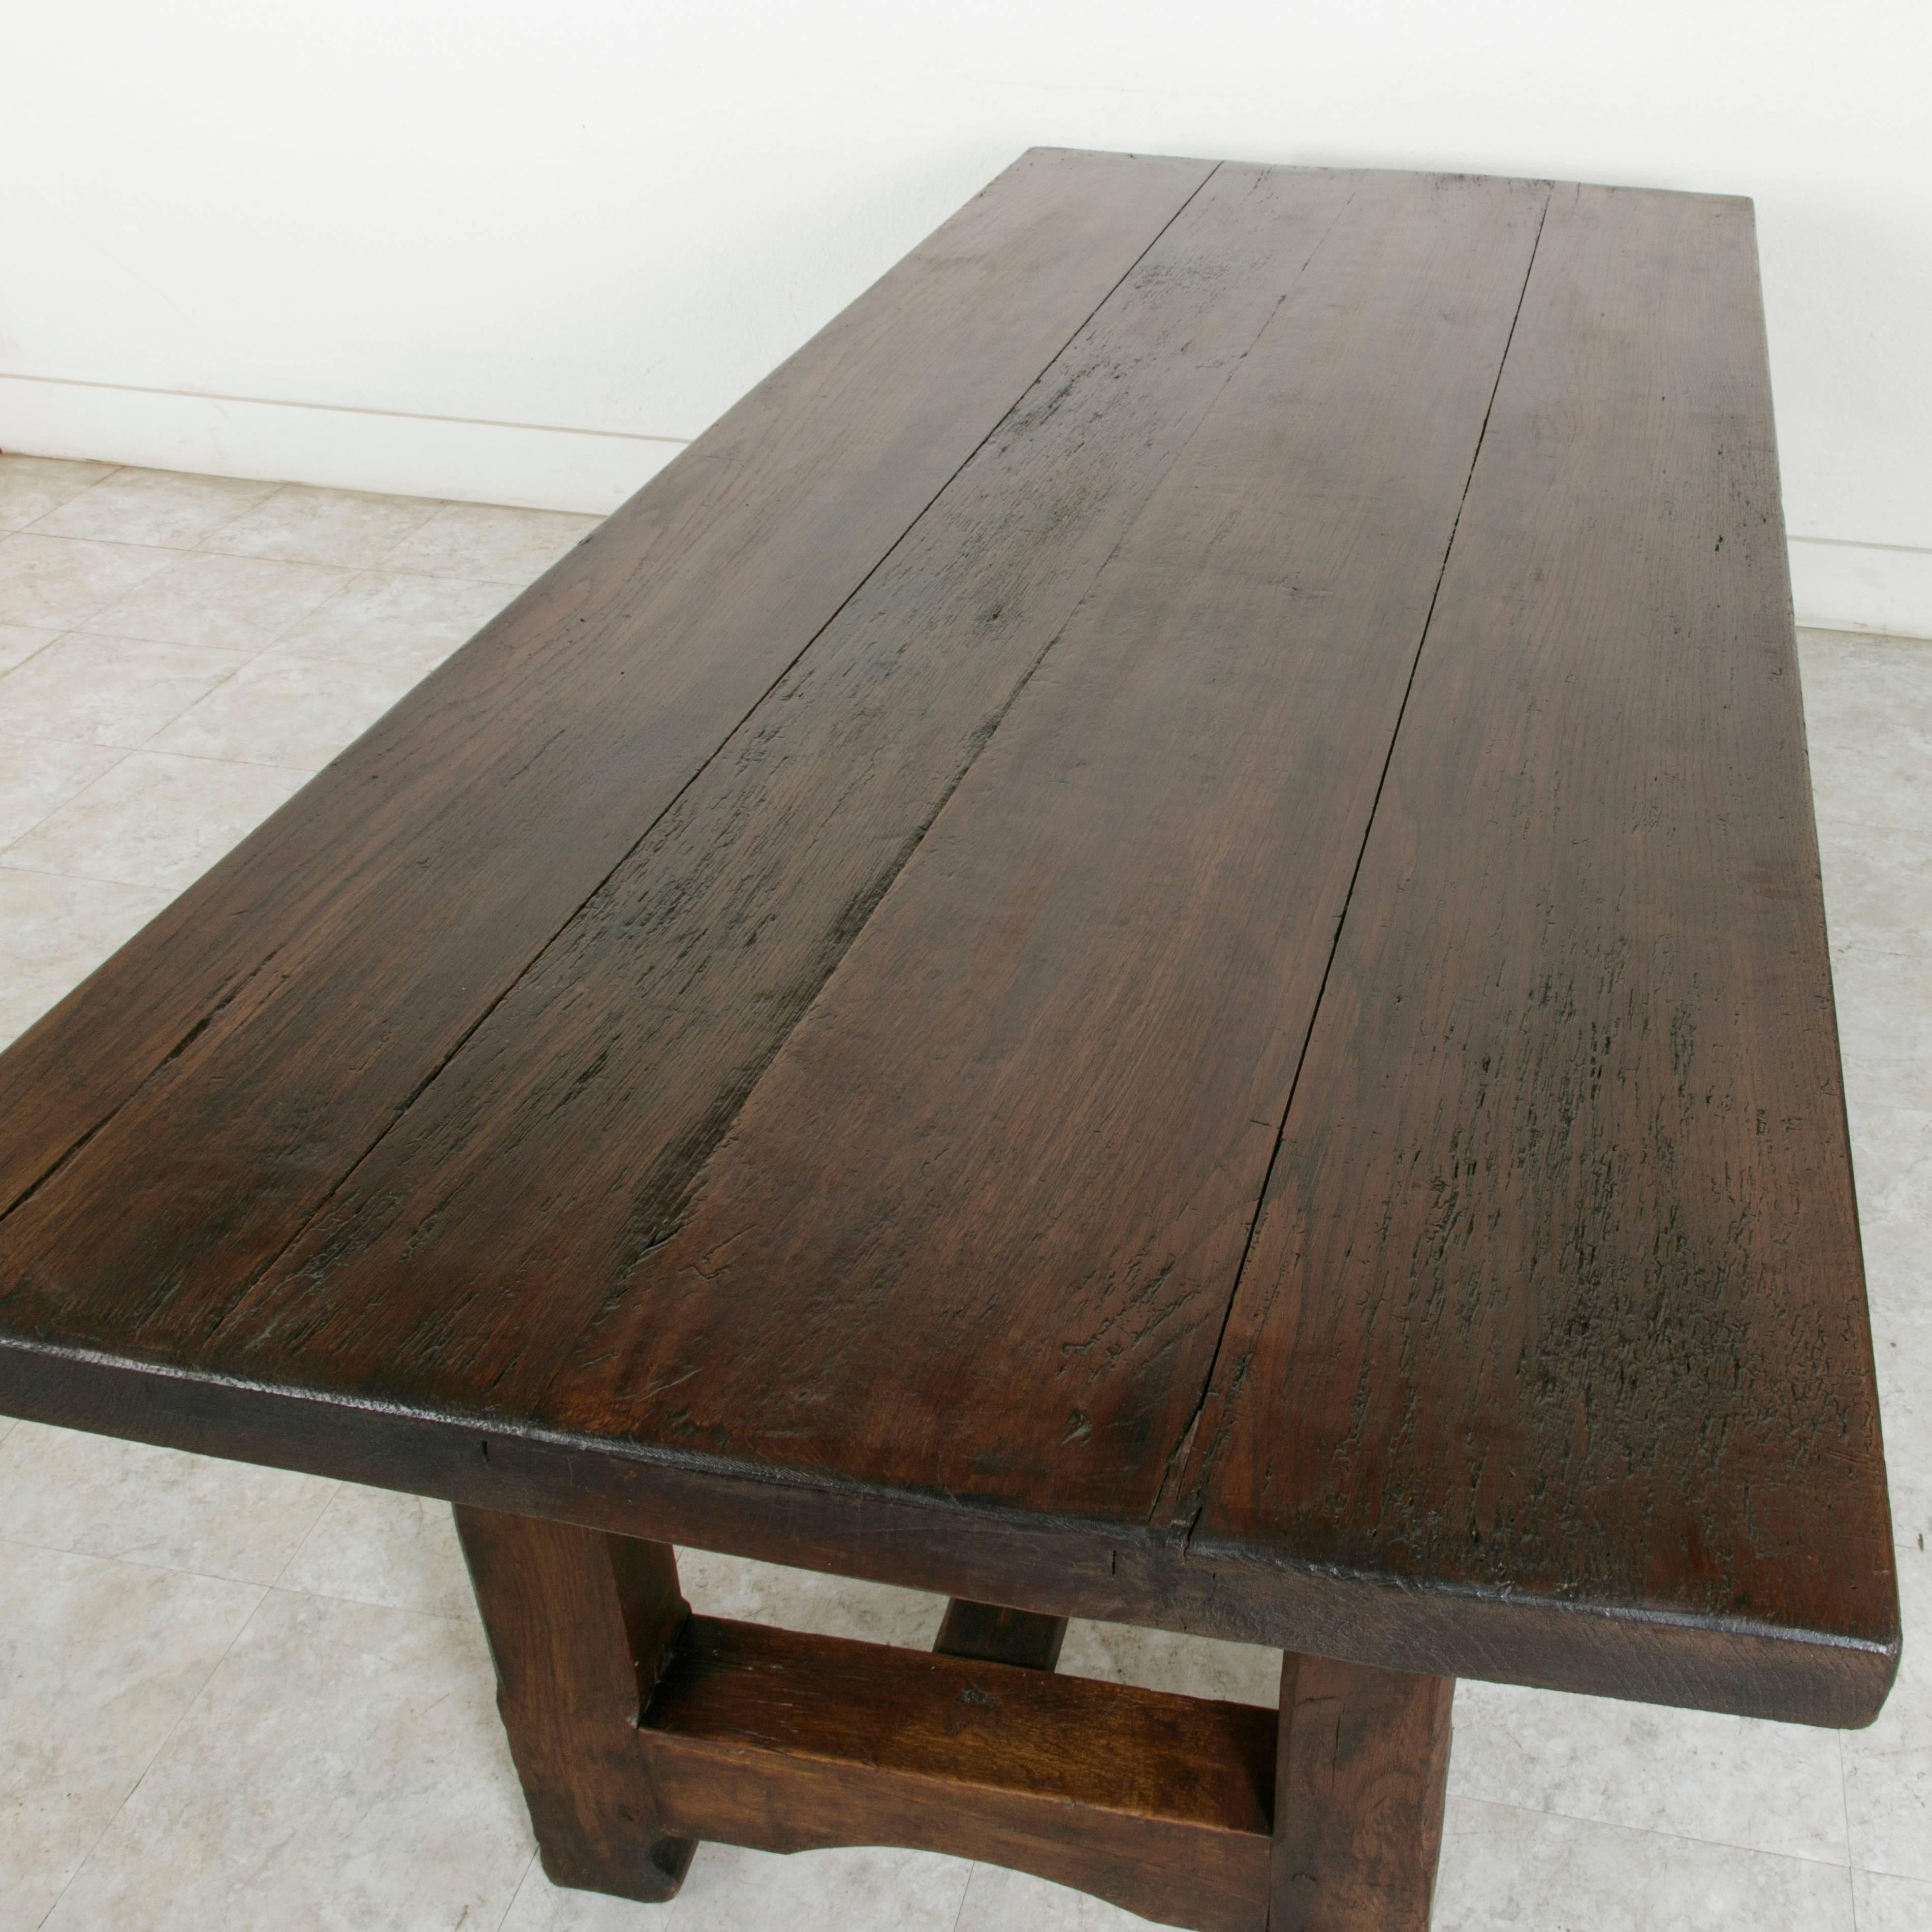 French Artisan-Made Oak Farm Table Dining Table Made from 18th Century Beams 3